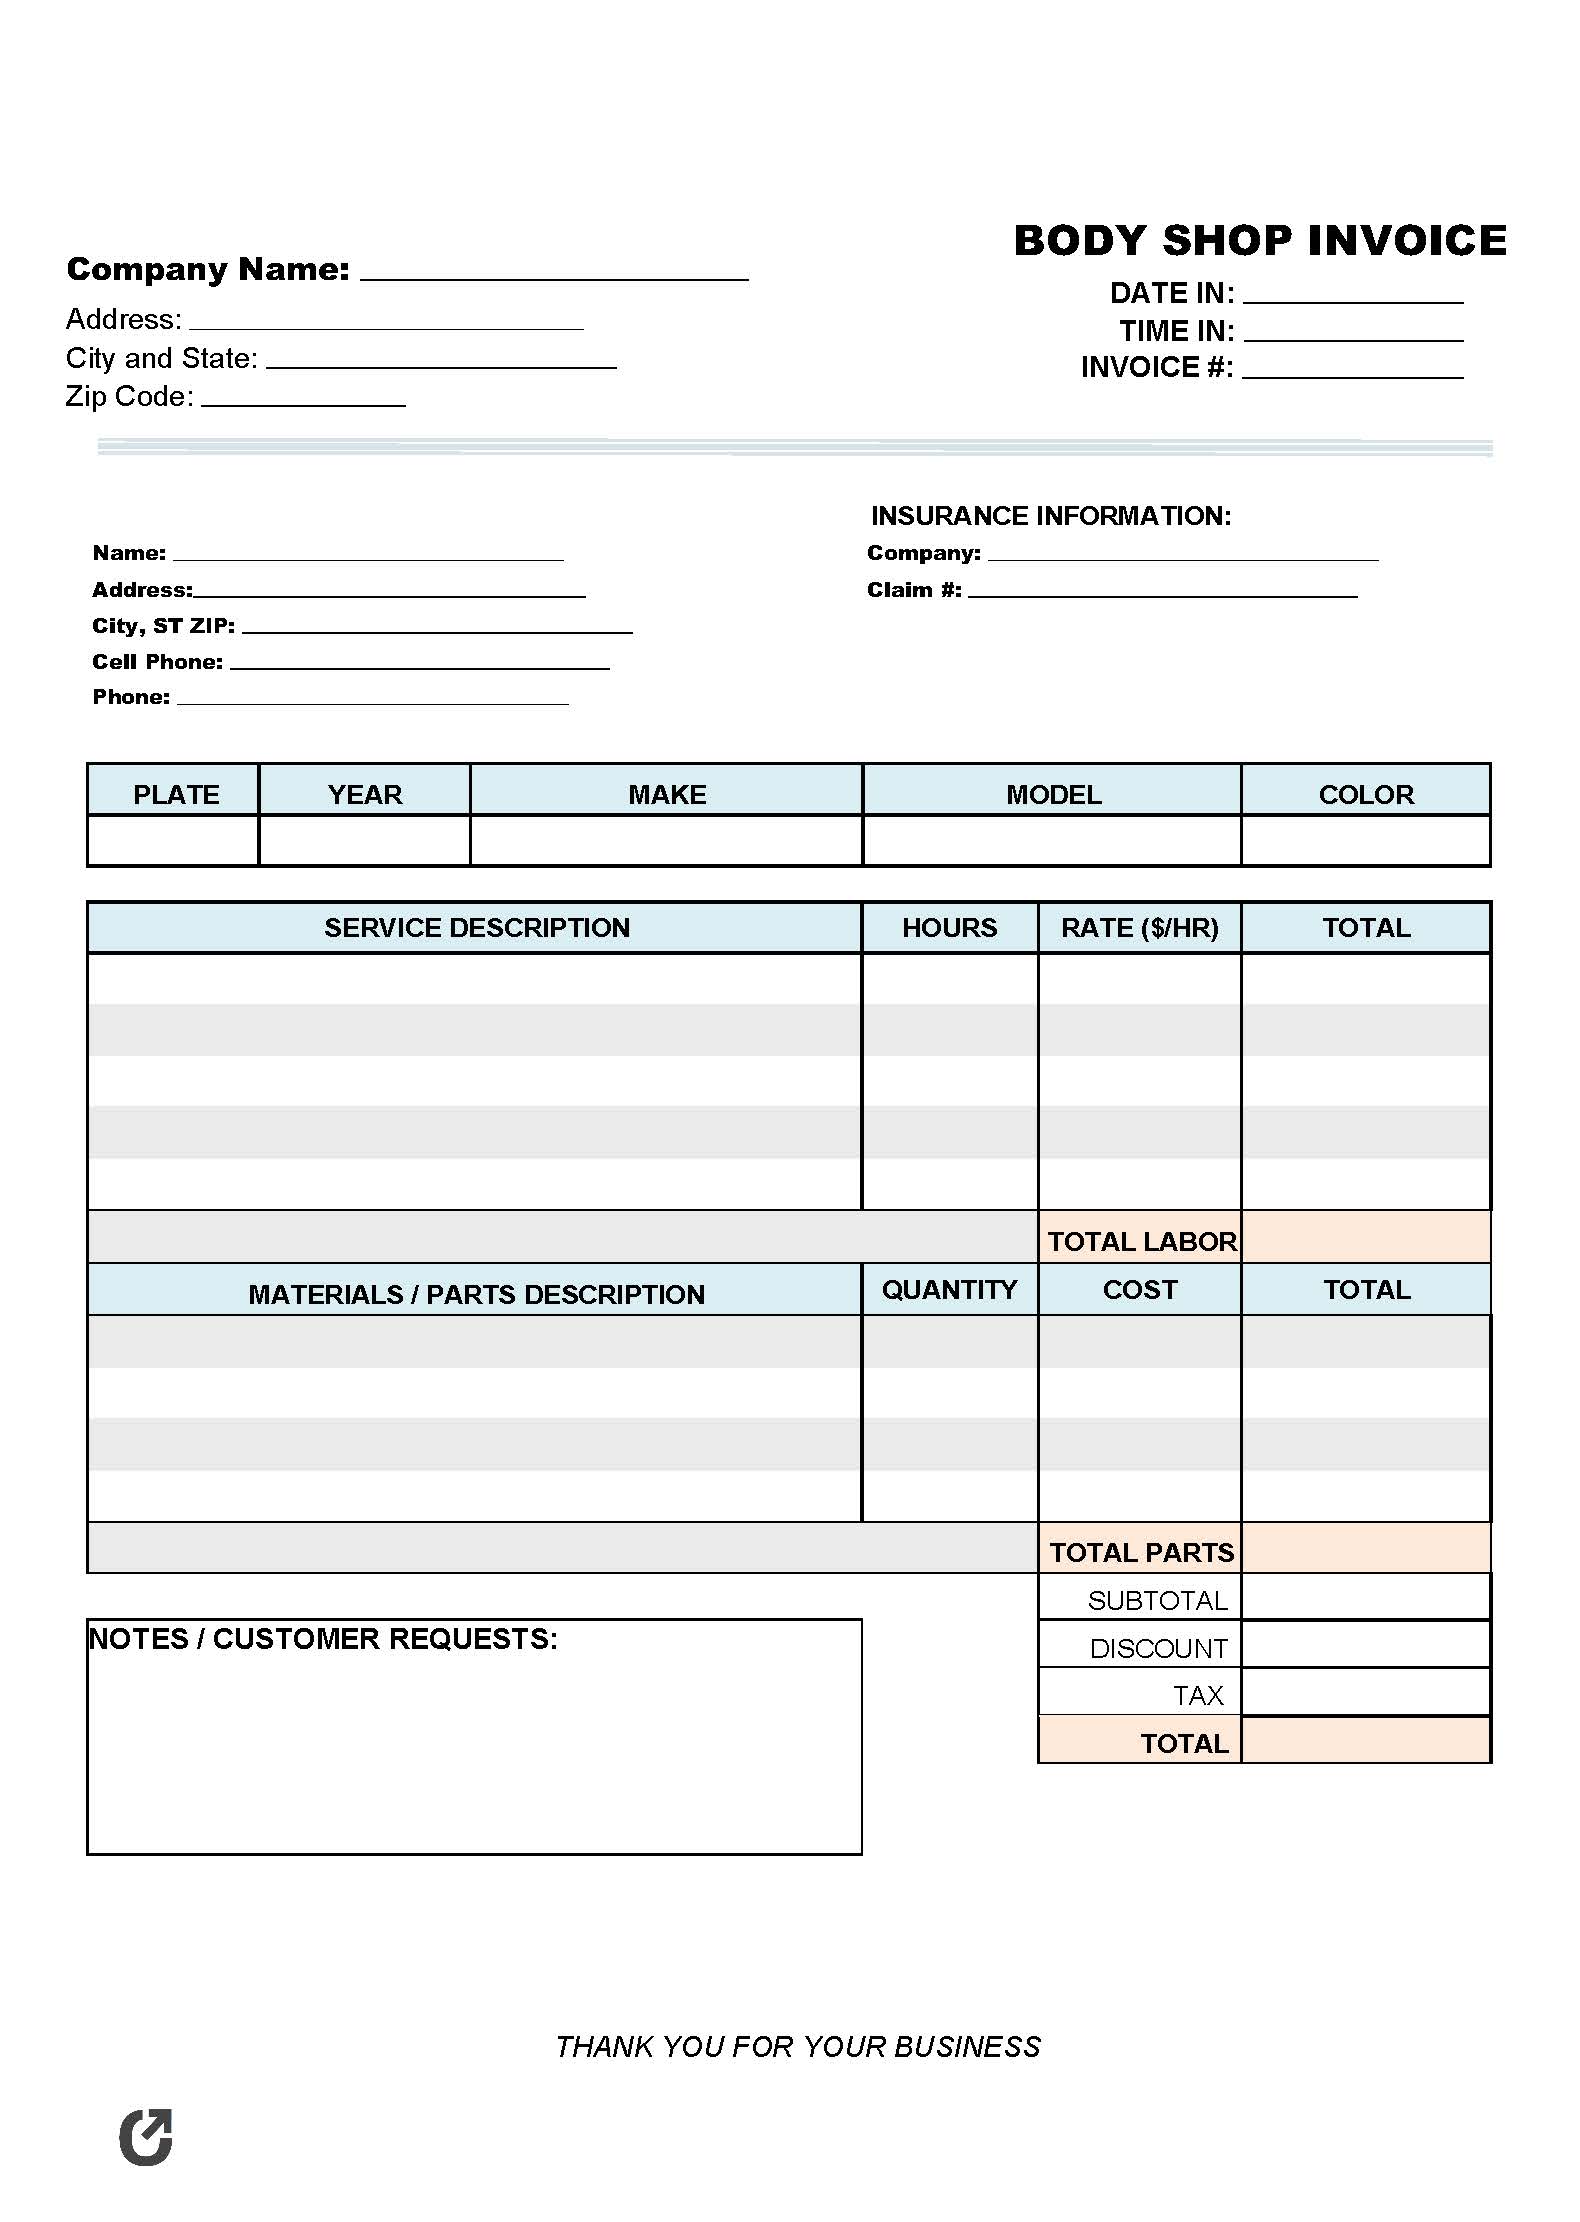 Free Body Shop Invoice Template  PDF  WORD  EXCEL With Regard To Time And Material Invoice Template